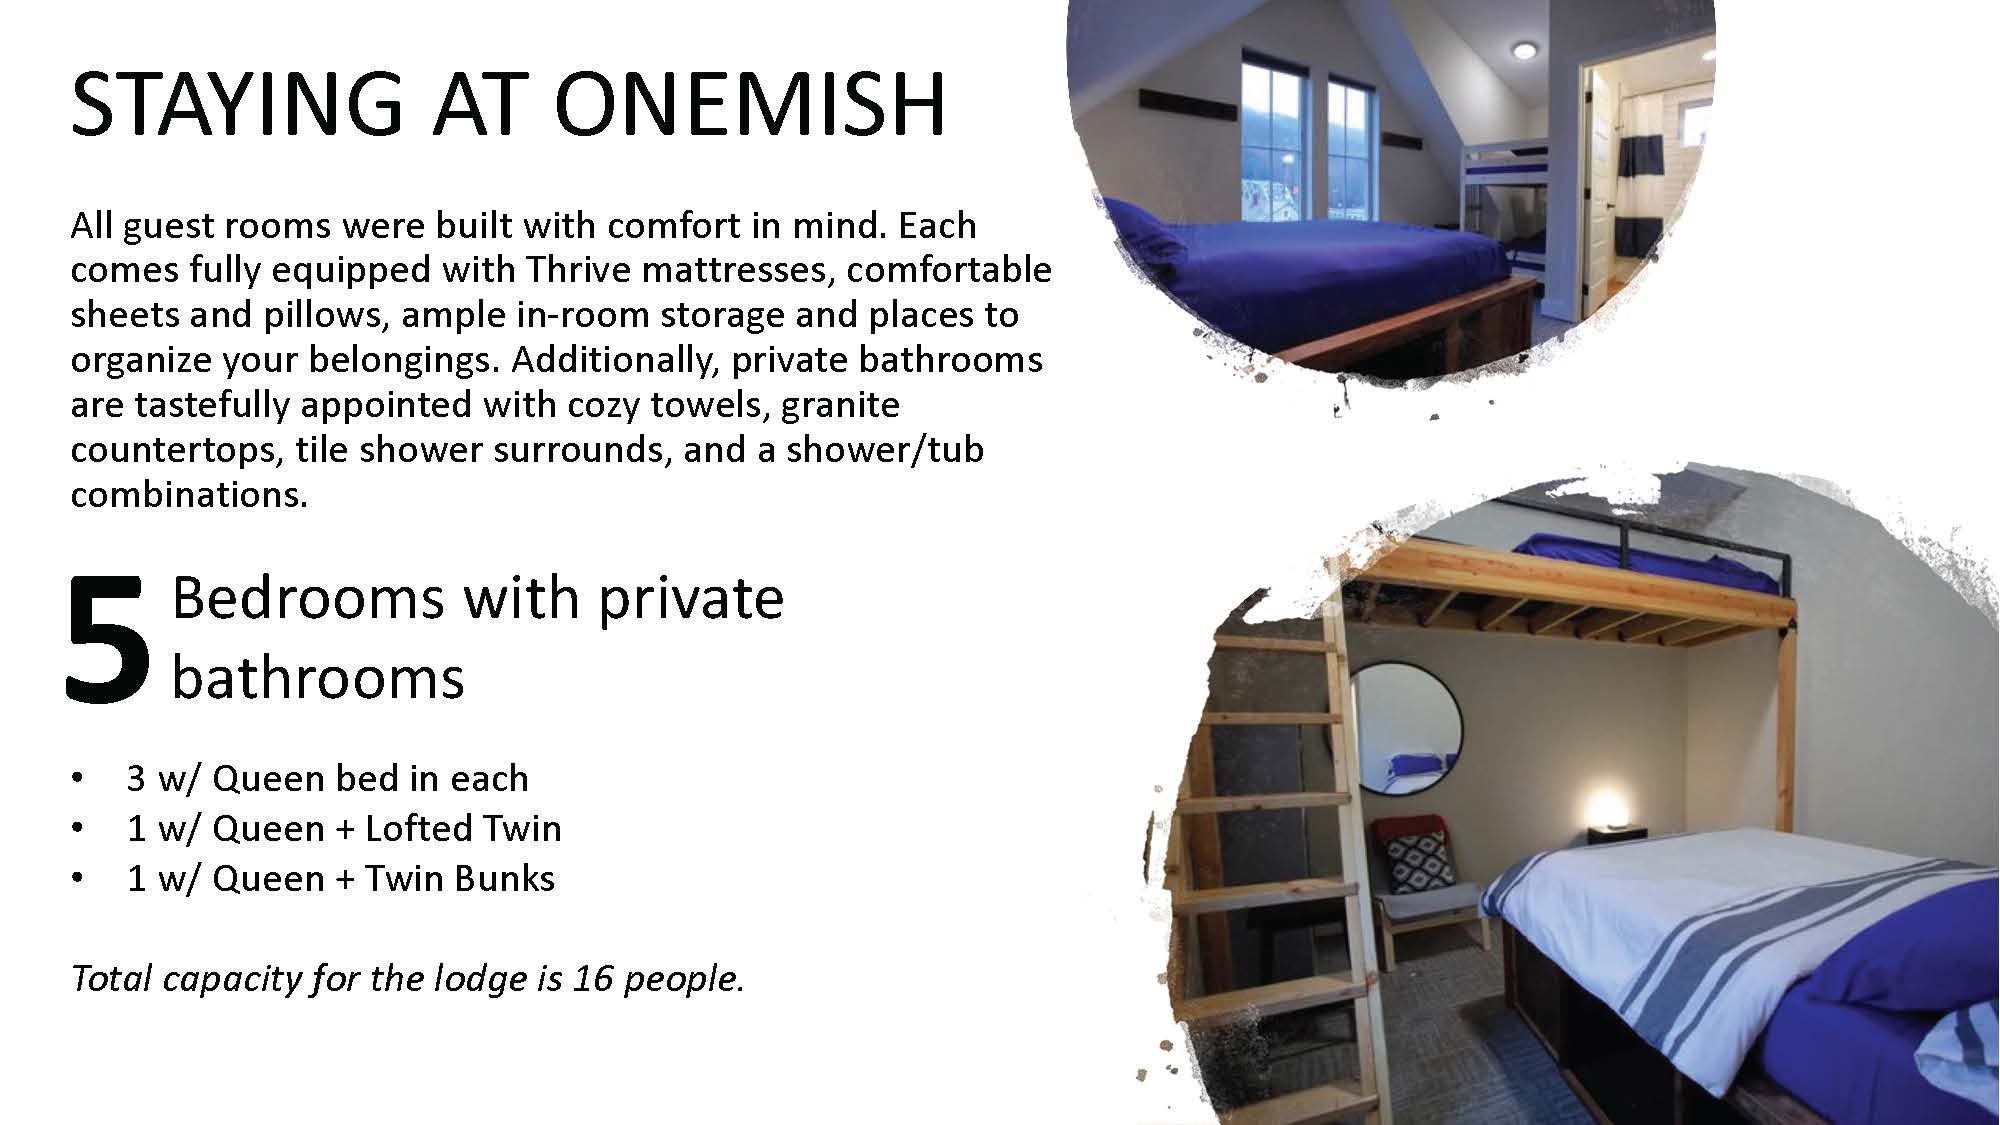 Onemish Lodge Overview 2018_Page_07